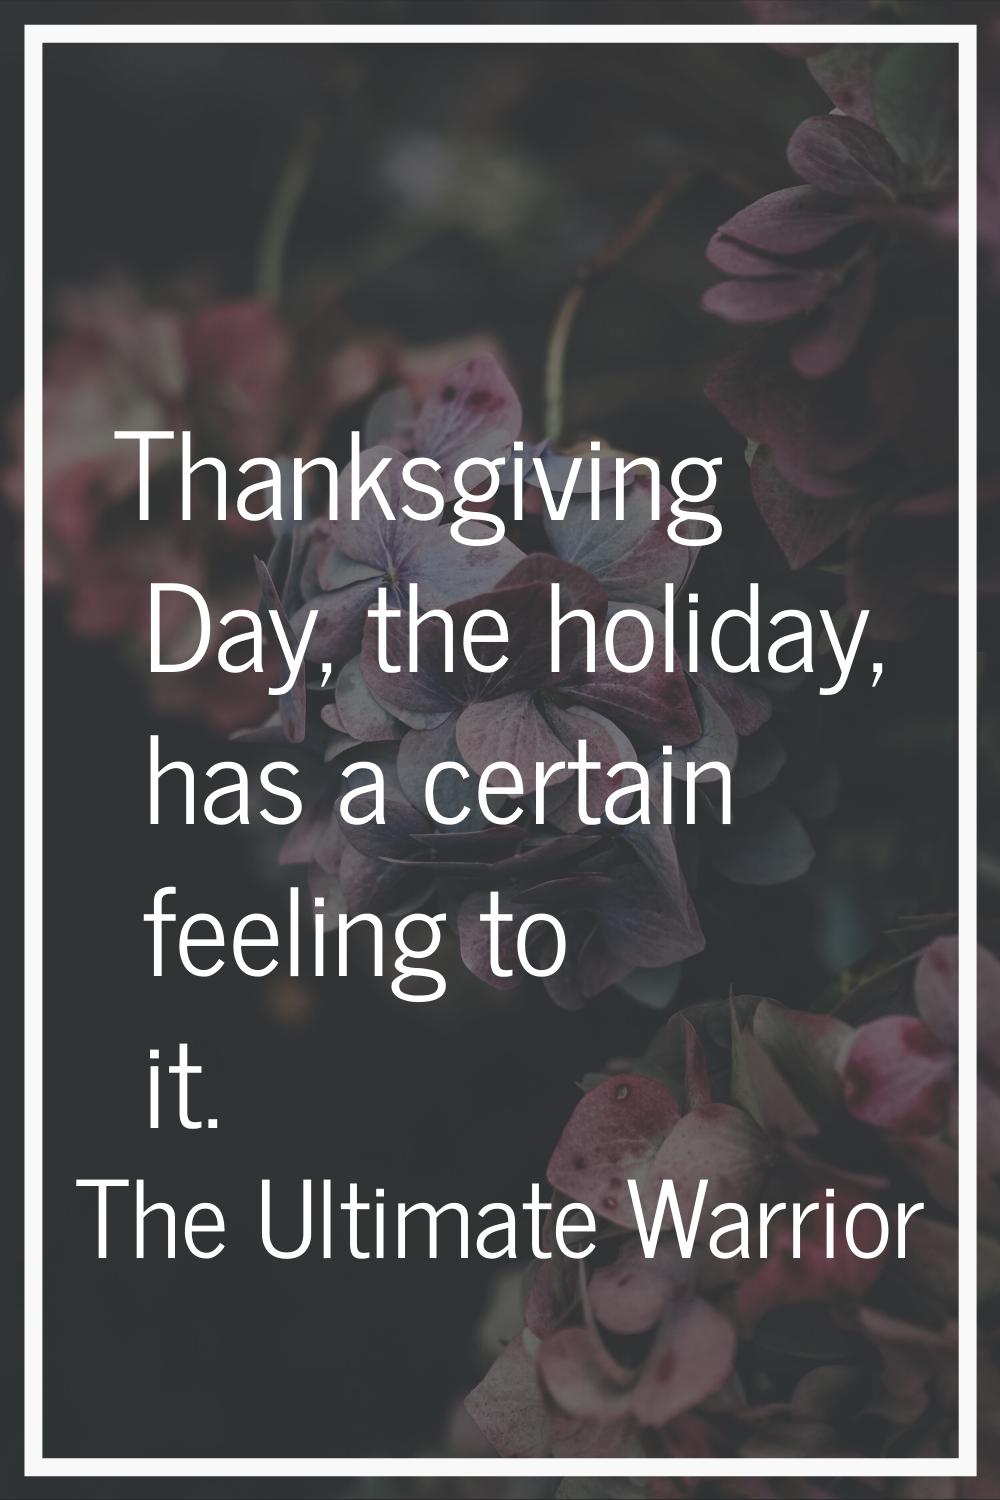 Thanksgiving Day, the holiday, has a certain feeling to it.